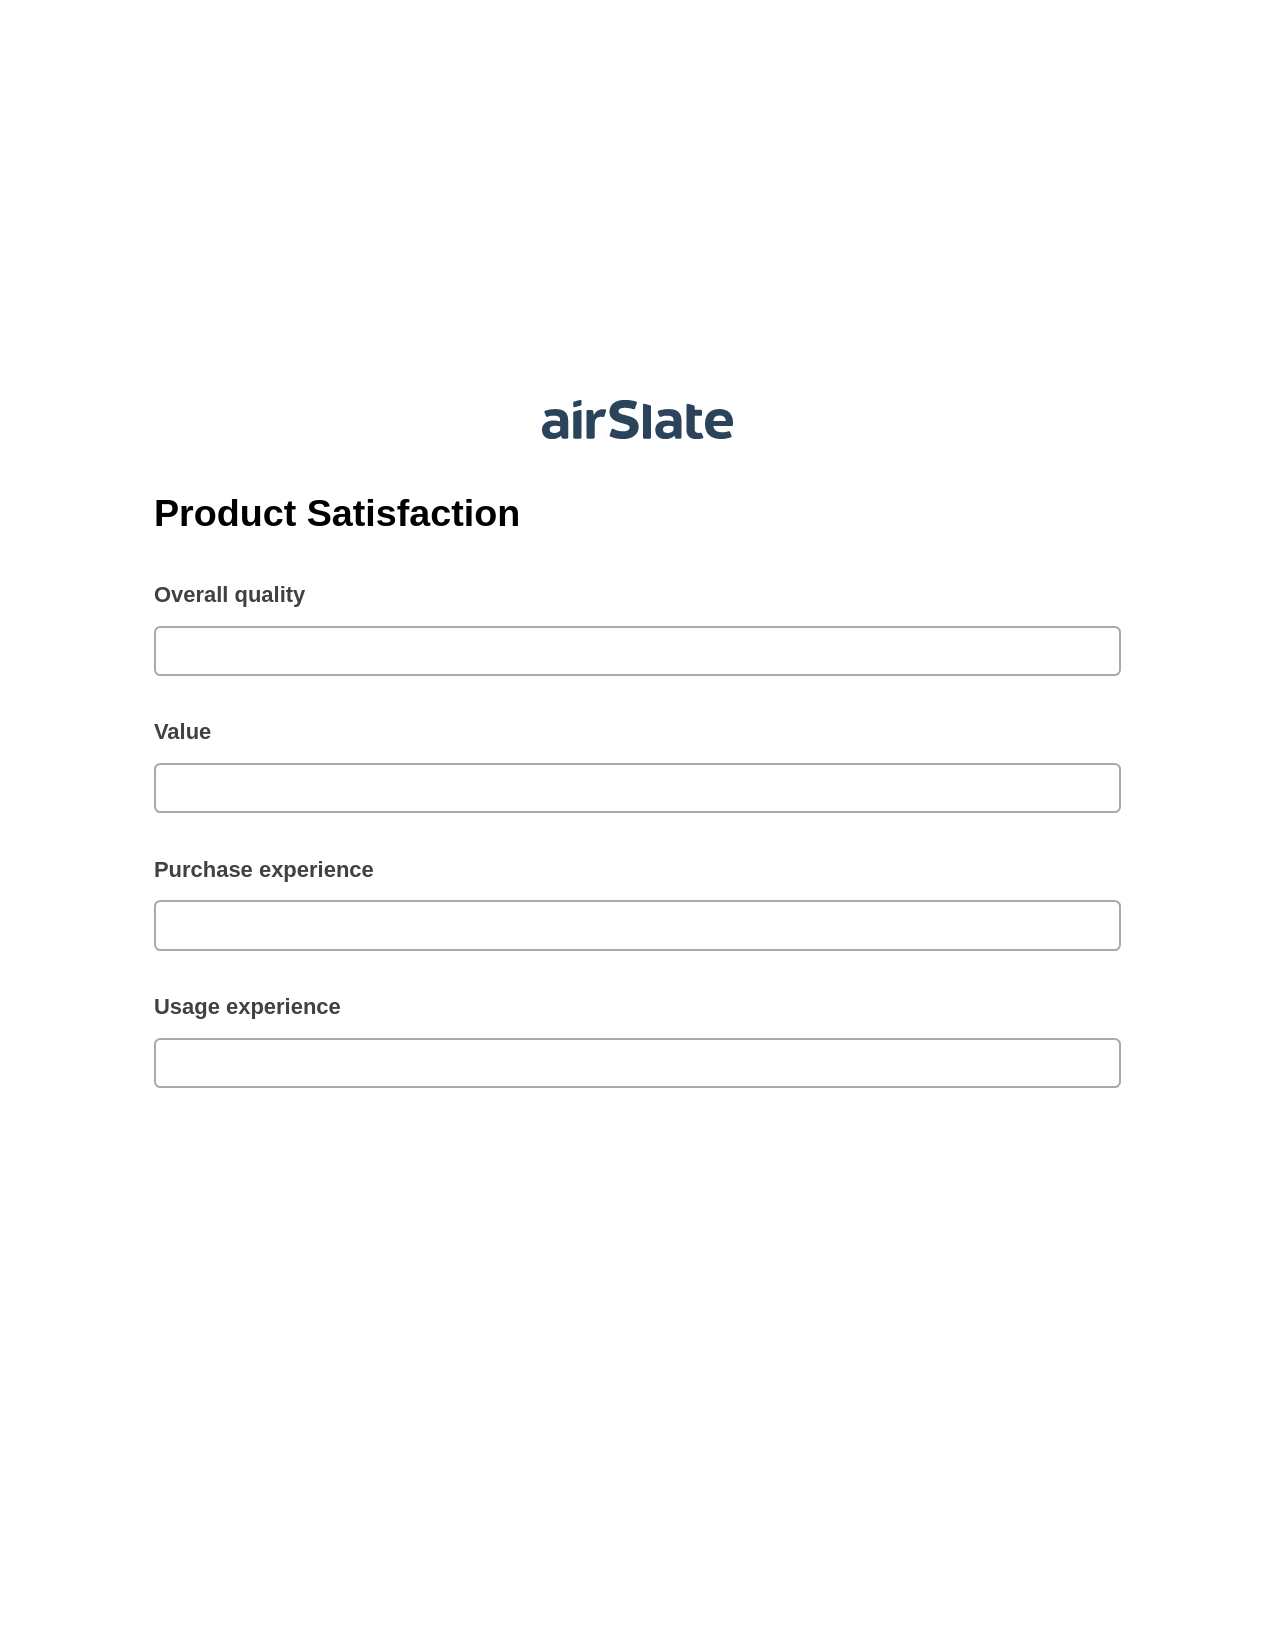 Product Satisfaction Pre-fill from CSV File Bot, Update MS Dynamics 365 Records Bot, Slack Notification Postfinish Bot